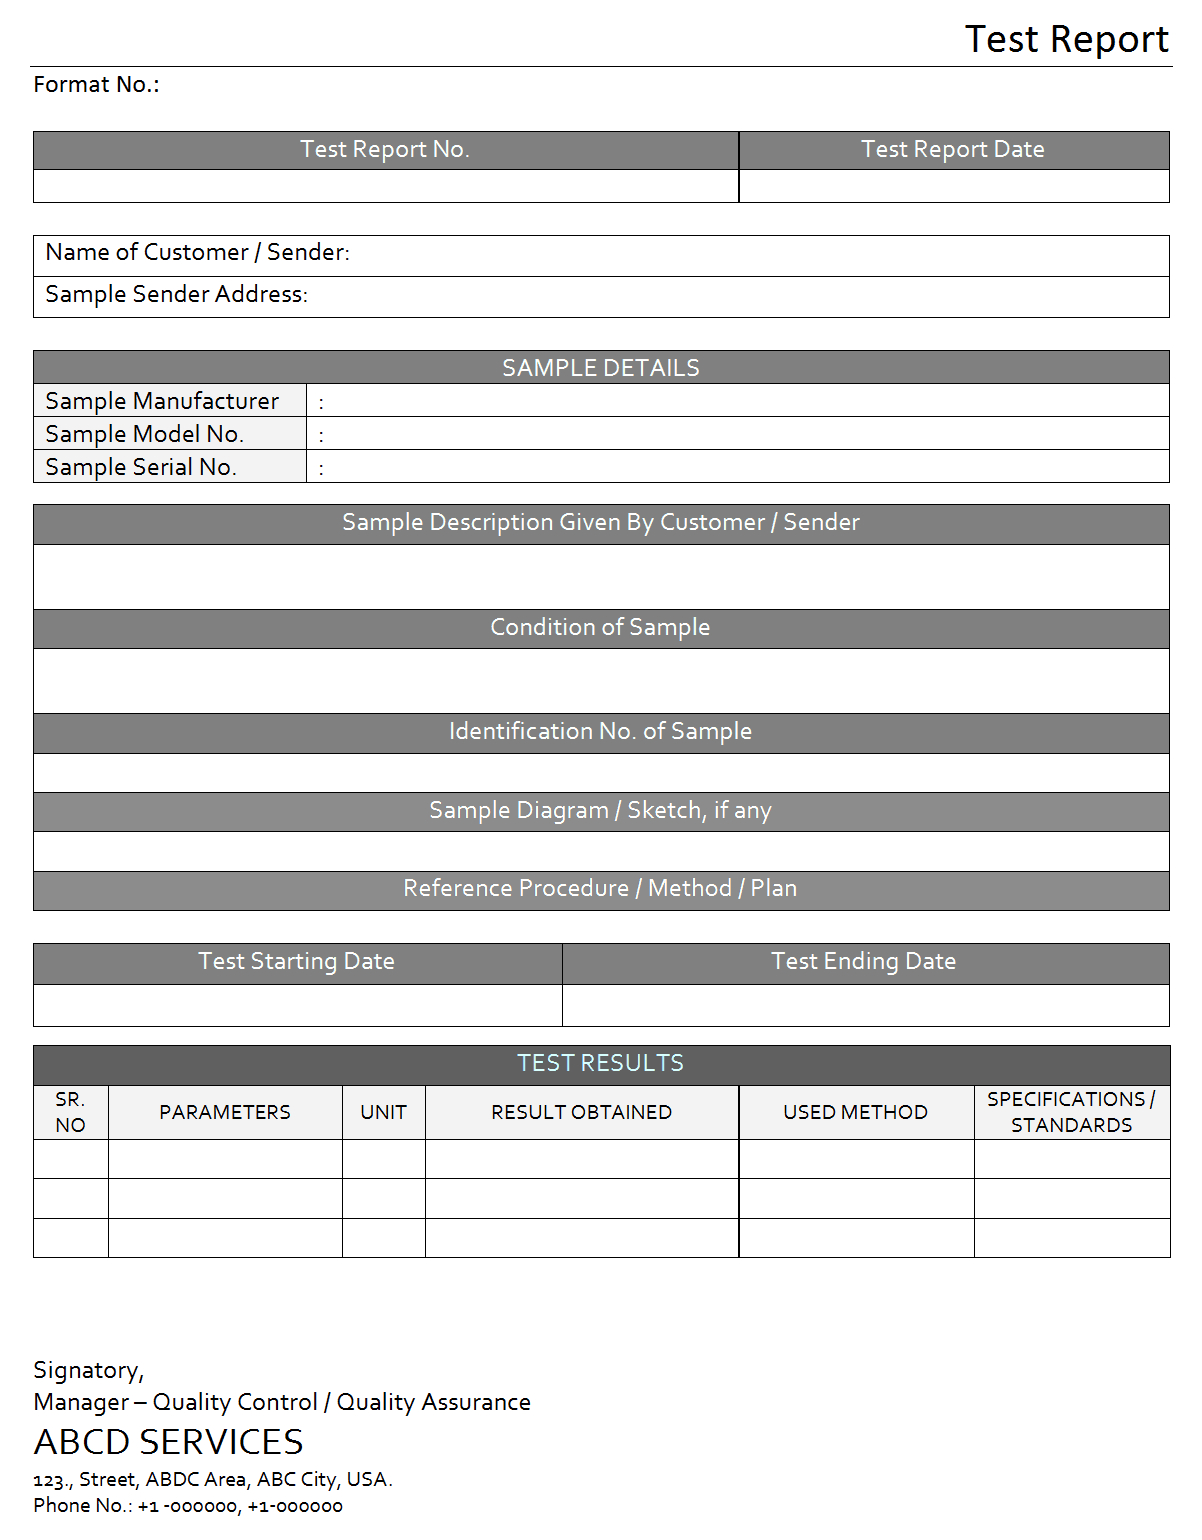 Test Report Template Excel ] – Templates Continuous Regarding Wppsi Iv Report Template